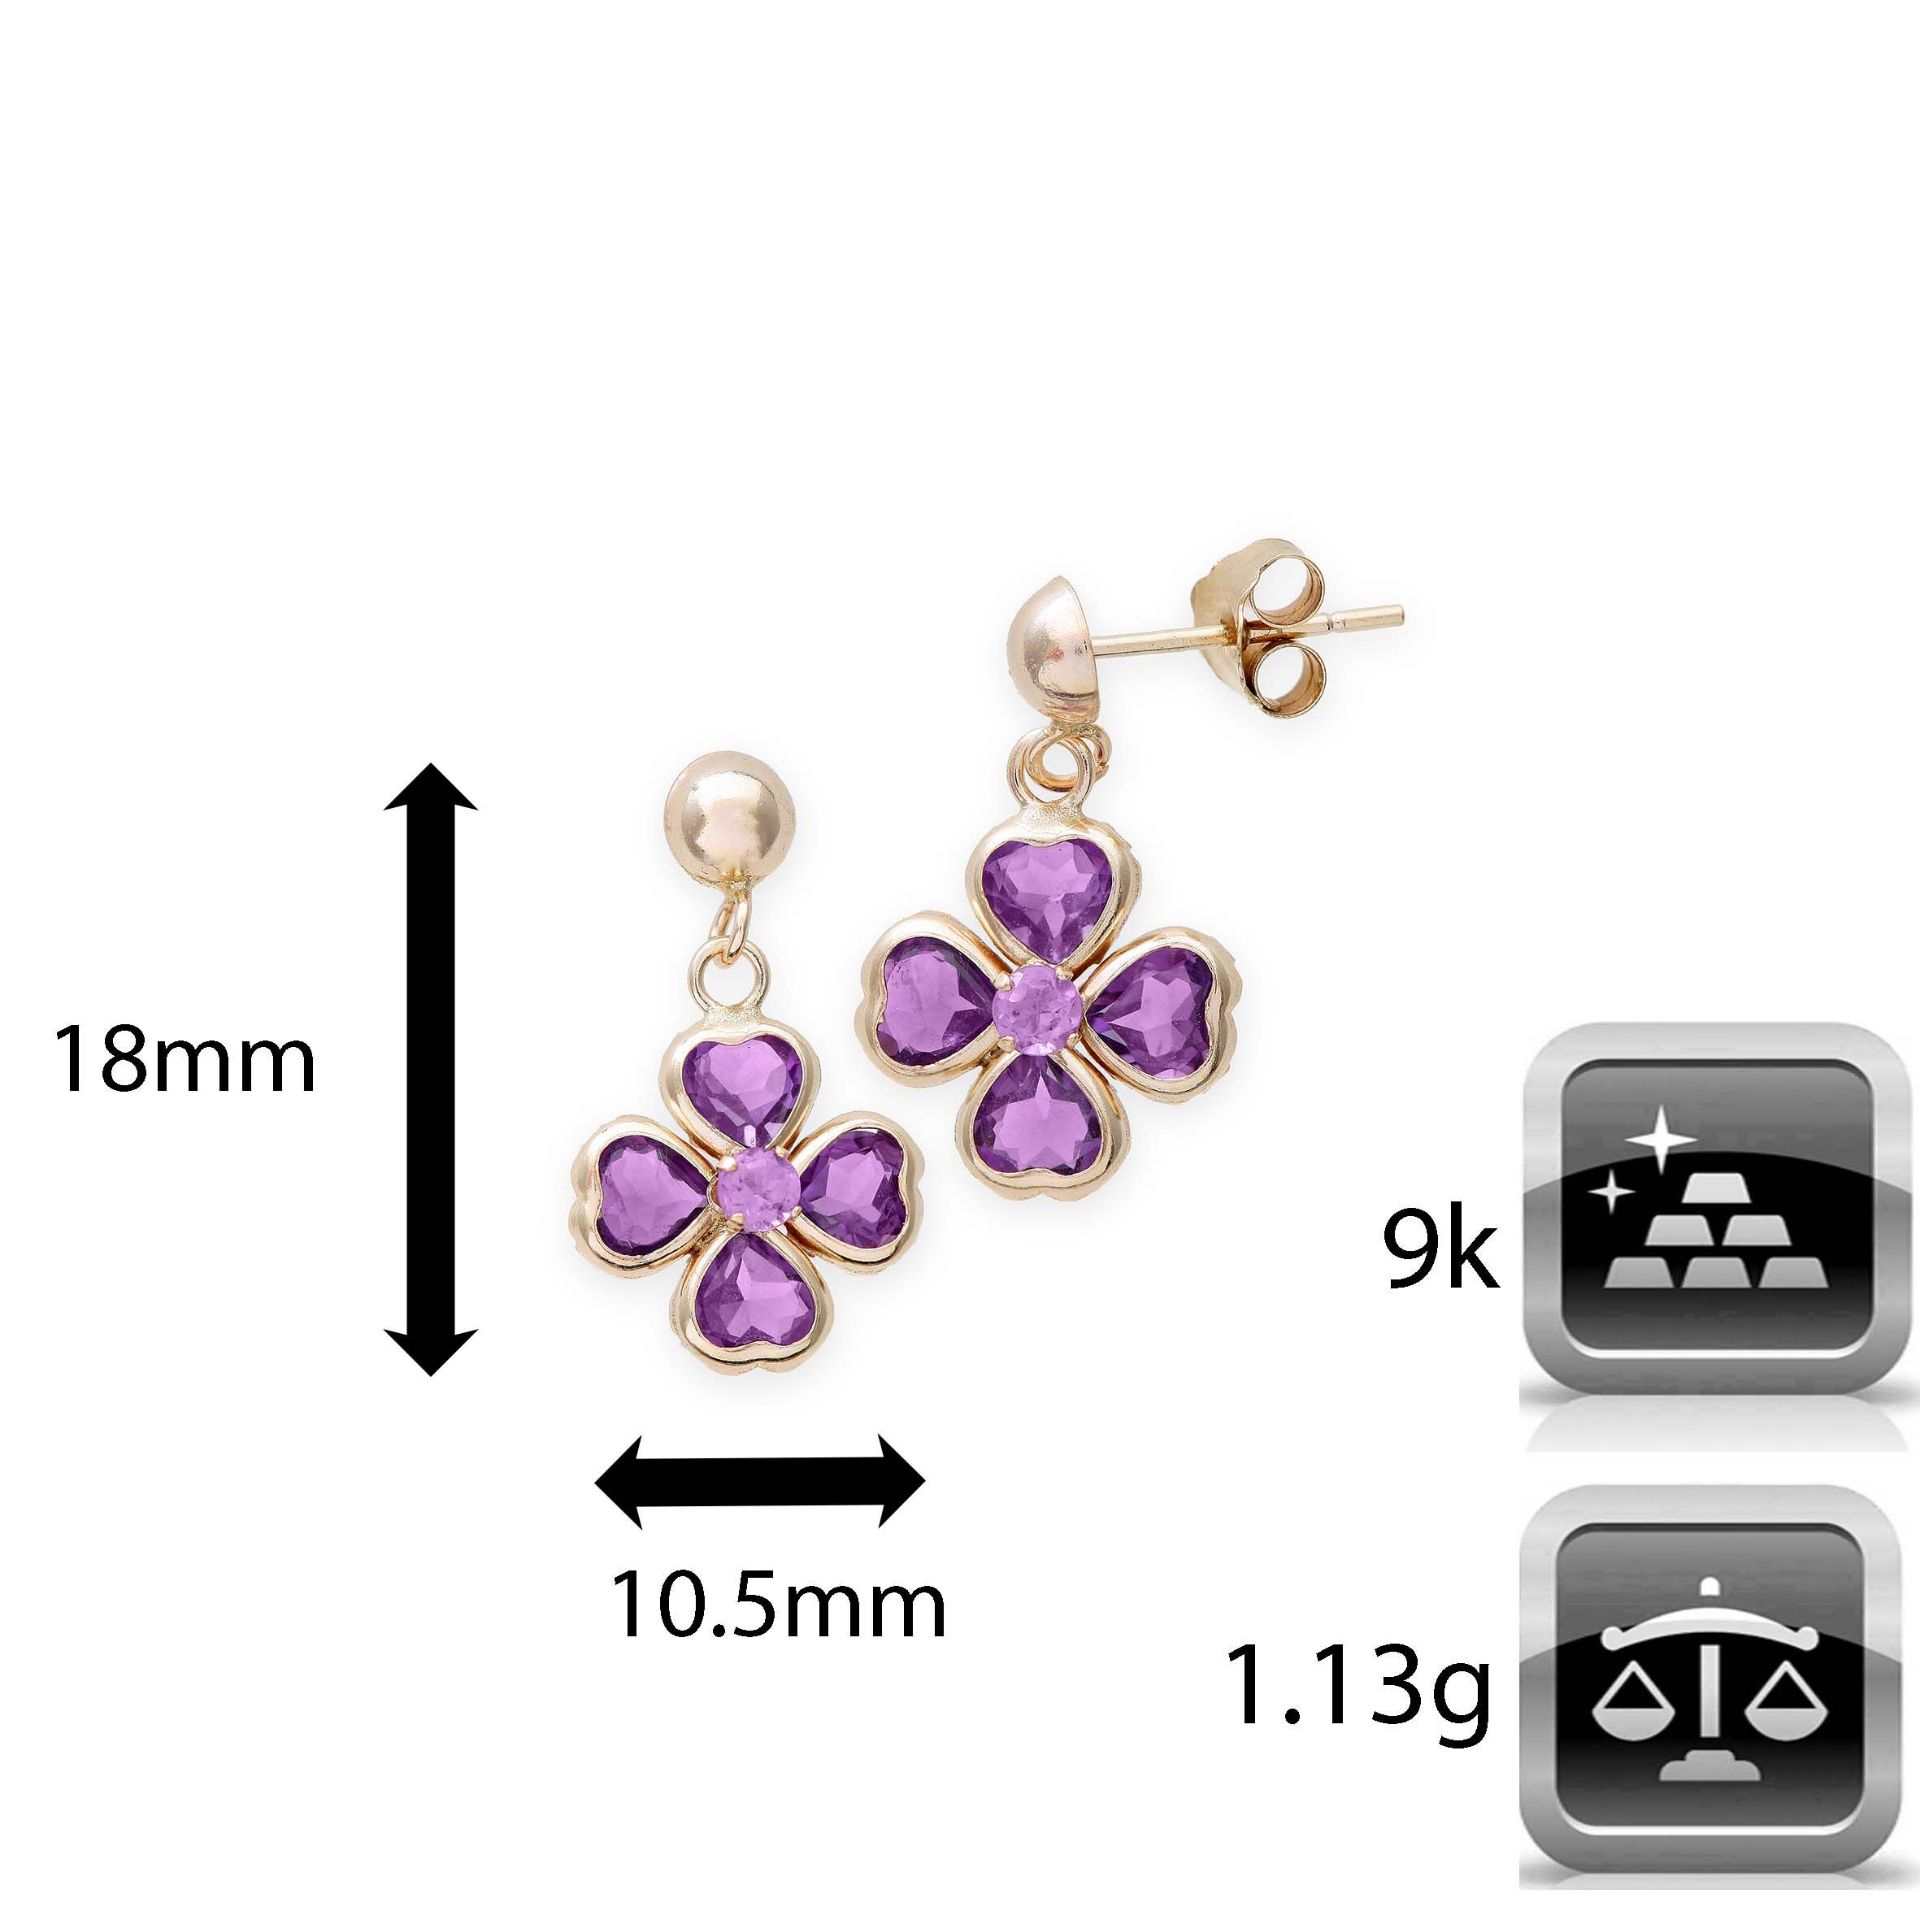 Amethyst Natural Gemstone Flower Shaped Earrrings, Metal 9ct yellow gold, Weight 1.35, RRP £179. - Image 2 of 2